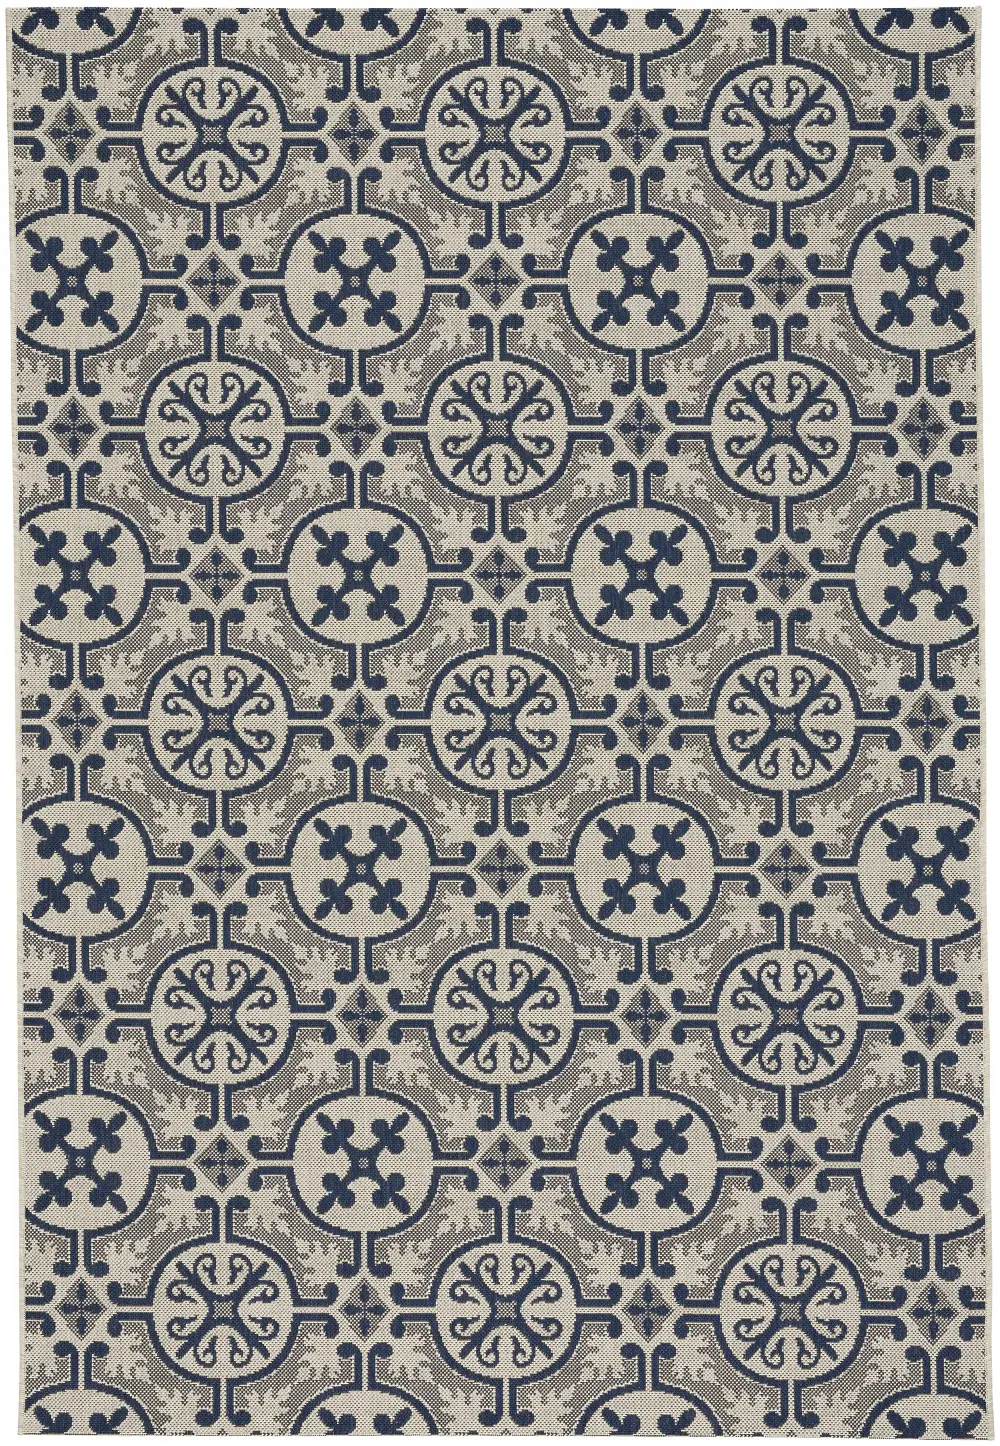 4737RS03110506475 4 x 6 Small Navy Blue Indoor-Outdoor Rug - Finesse Tile-1